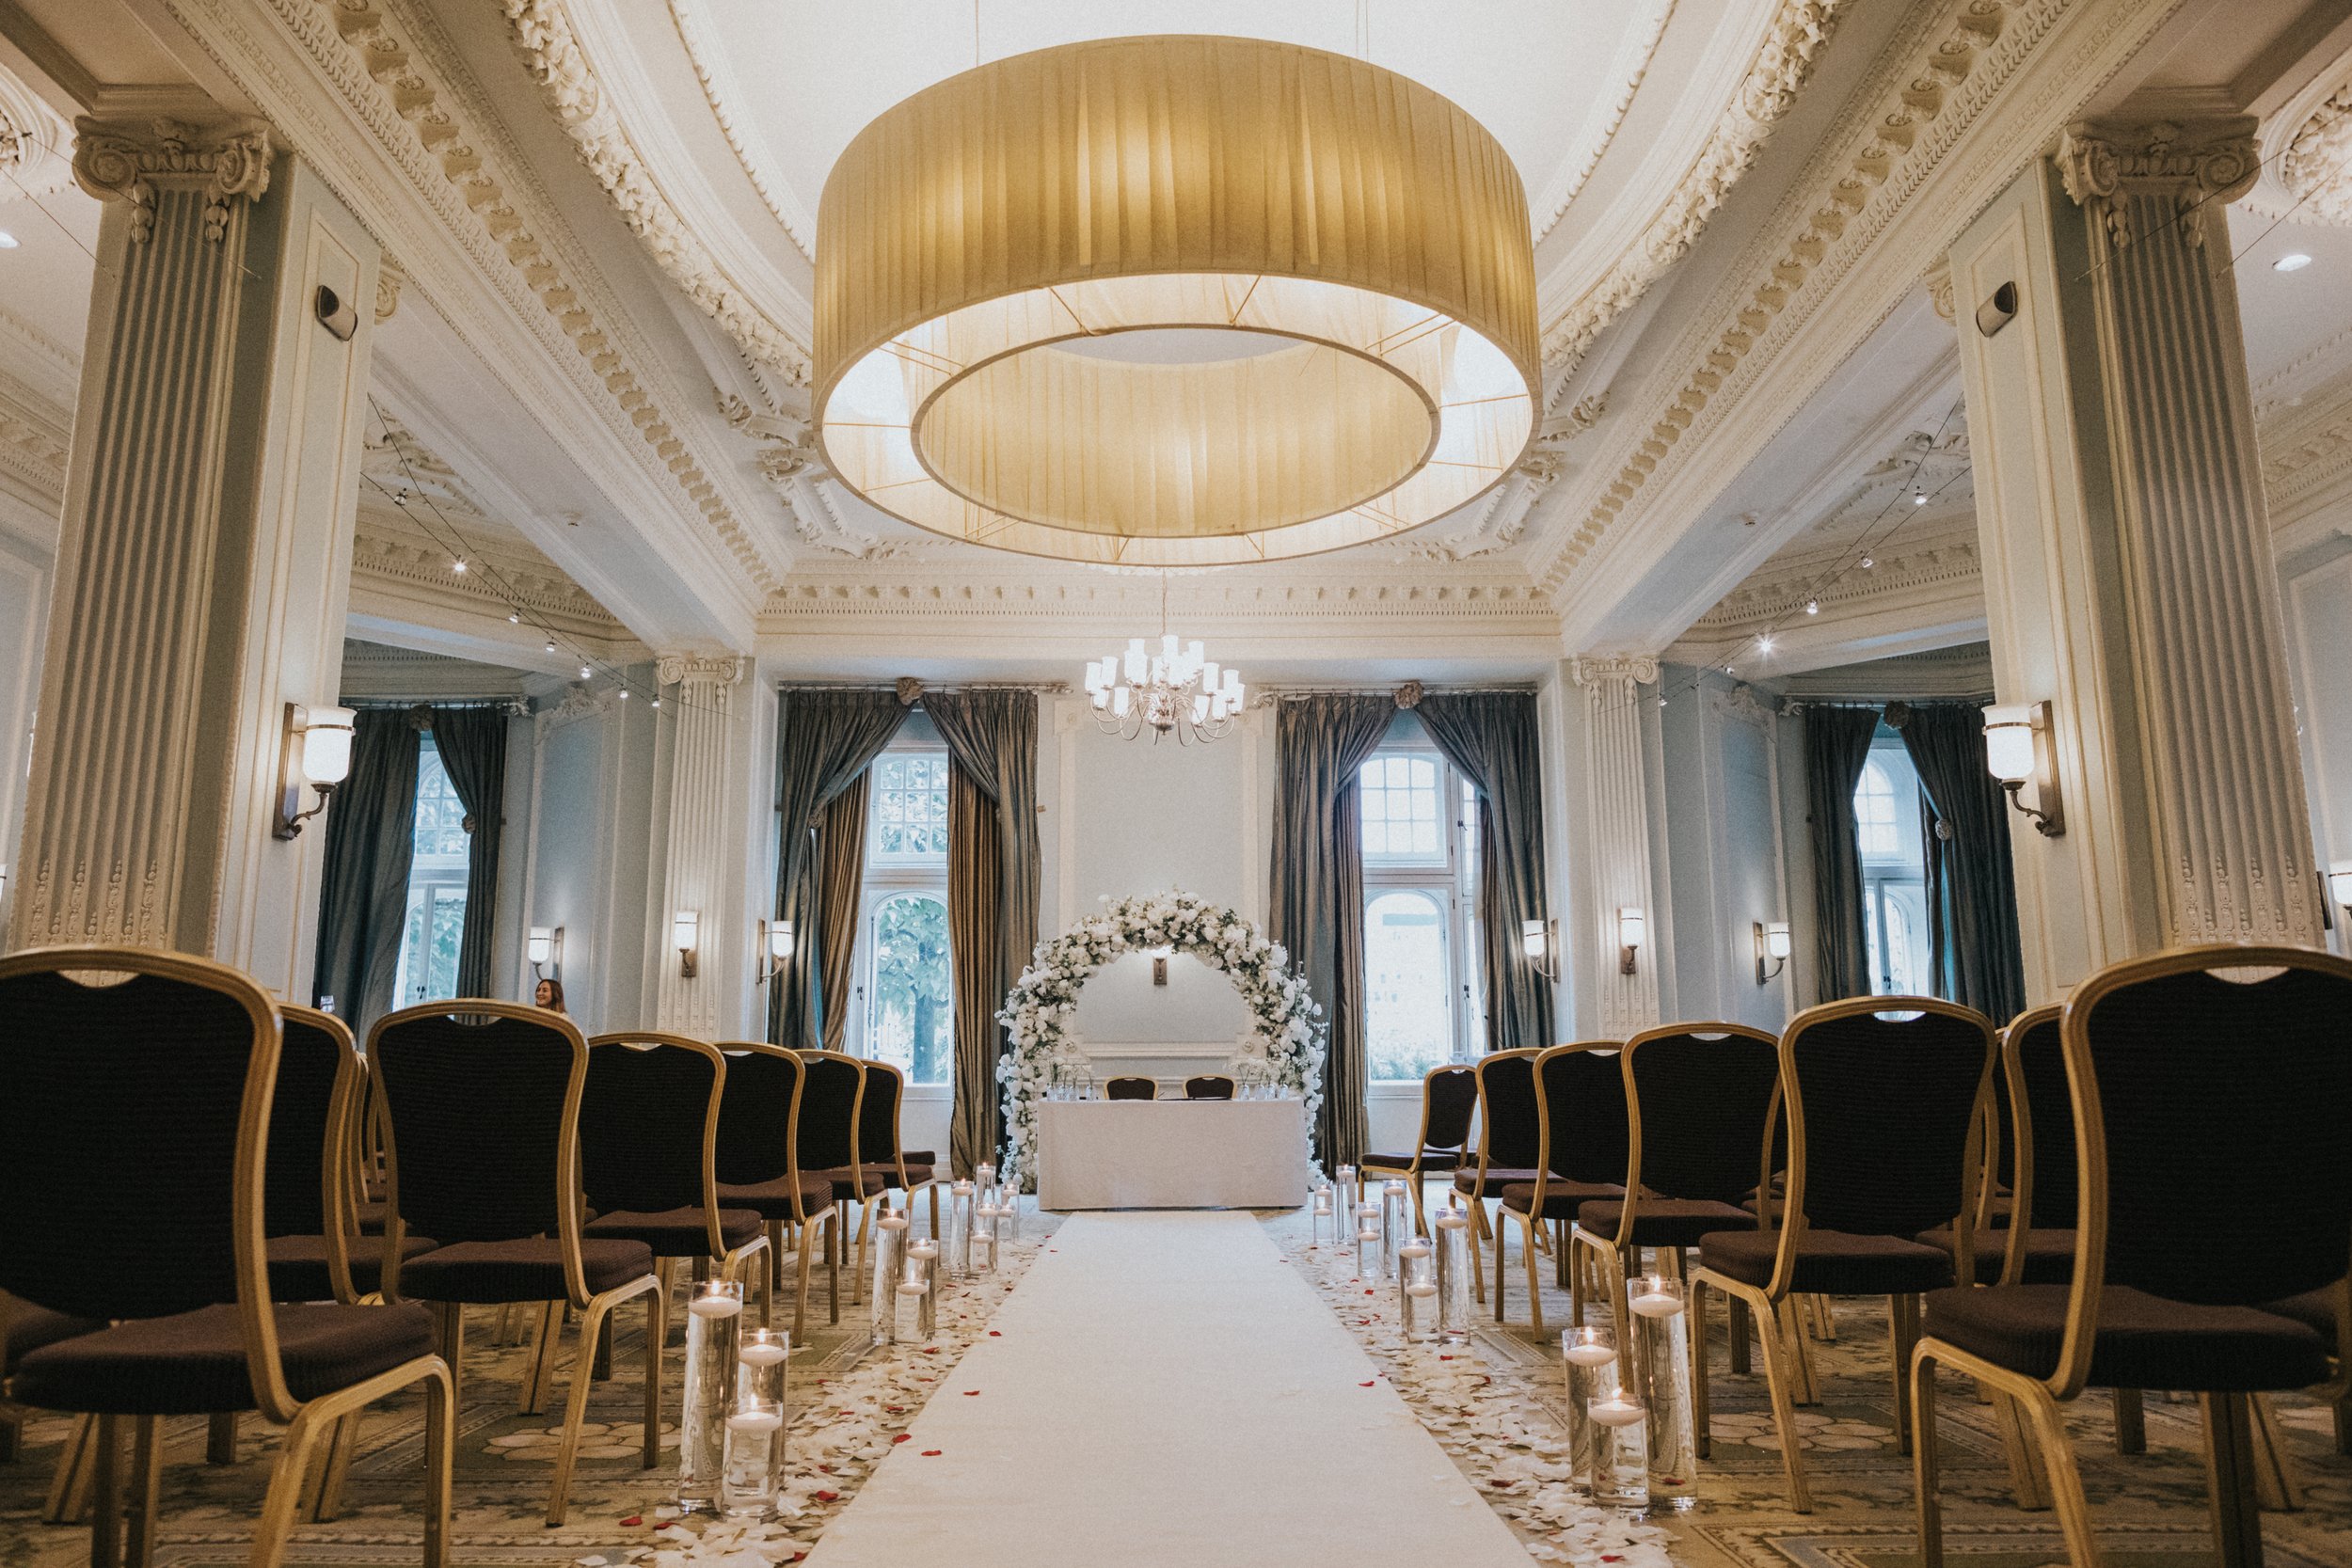 Ceremony room at the Midland hotel. 